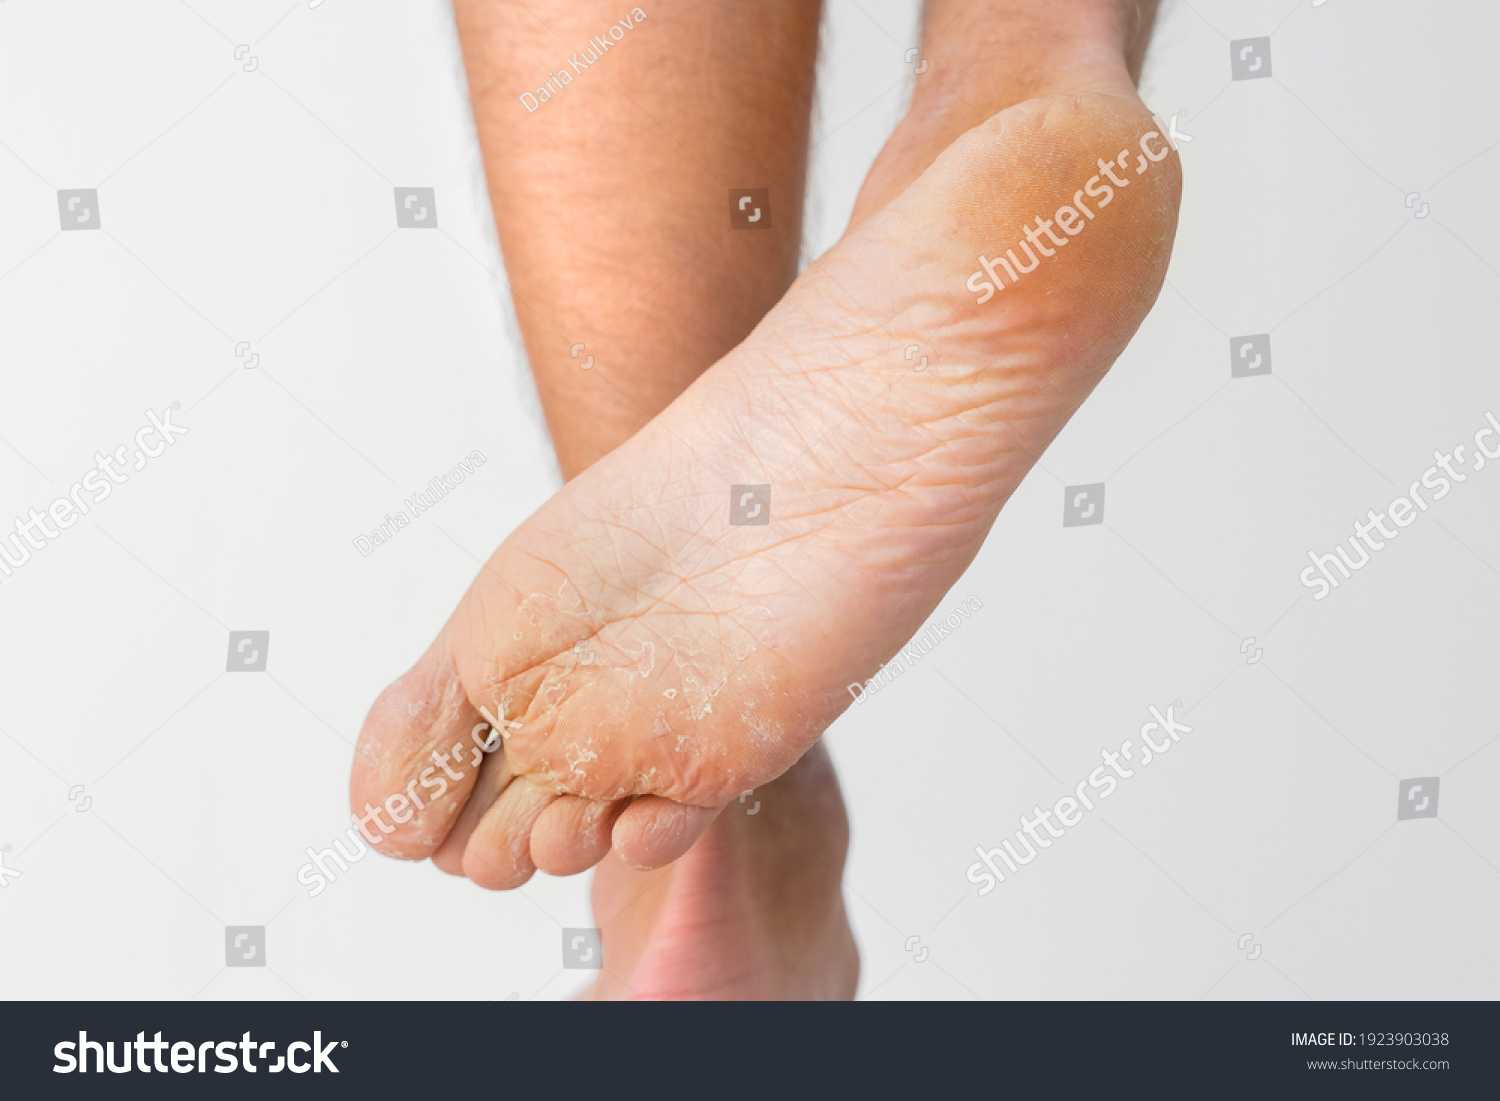 Close up of dry feet. Peeling and cracked foot. Fungal infection or athlete's foot, dry skin, dermatitis, eczema, psoriasis, sweaty feet or dehydration. Health care concept #1923903038